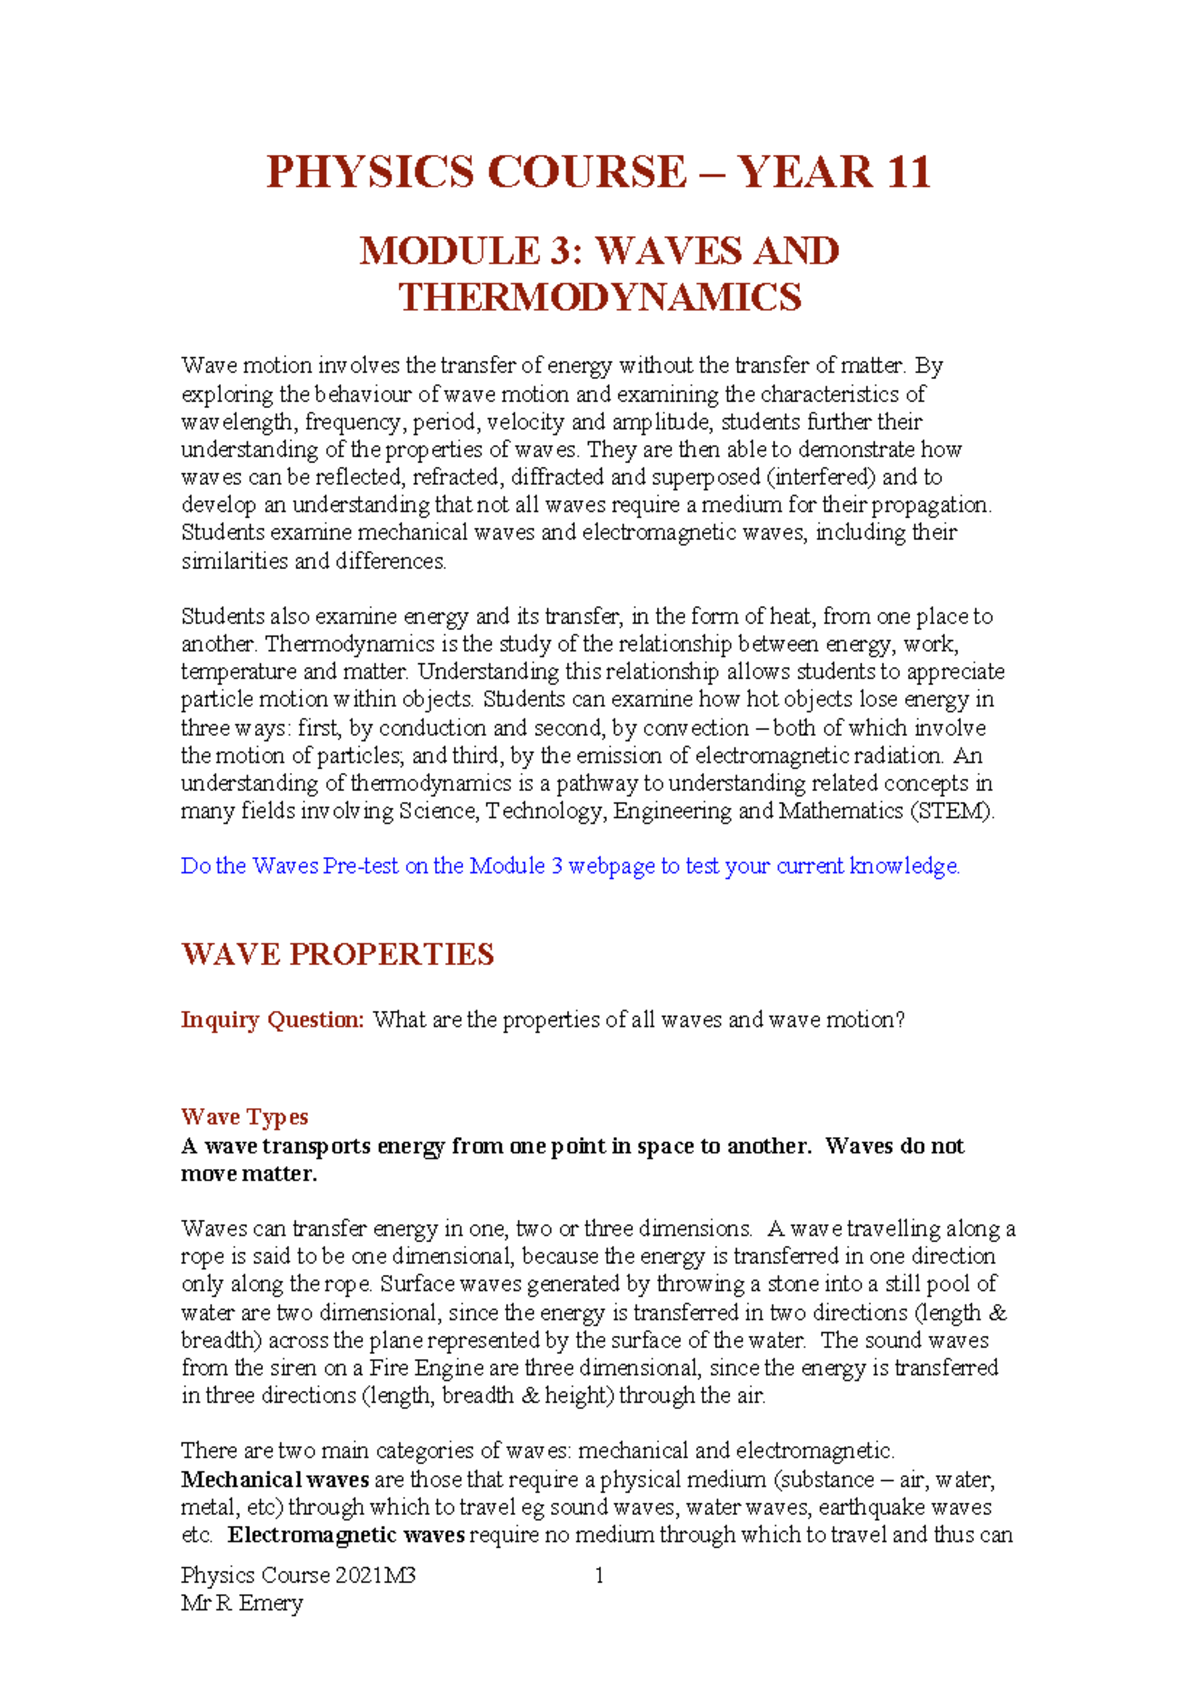 Module 3 Waves And Thermodynamics Physics Course Year 11 Module 3 Waves And Thermodynamics 9944